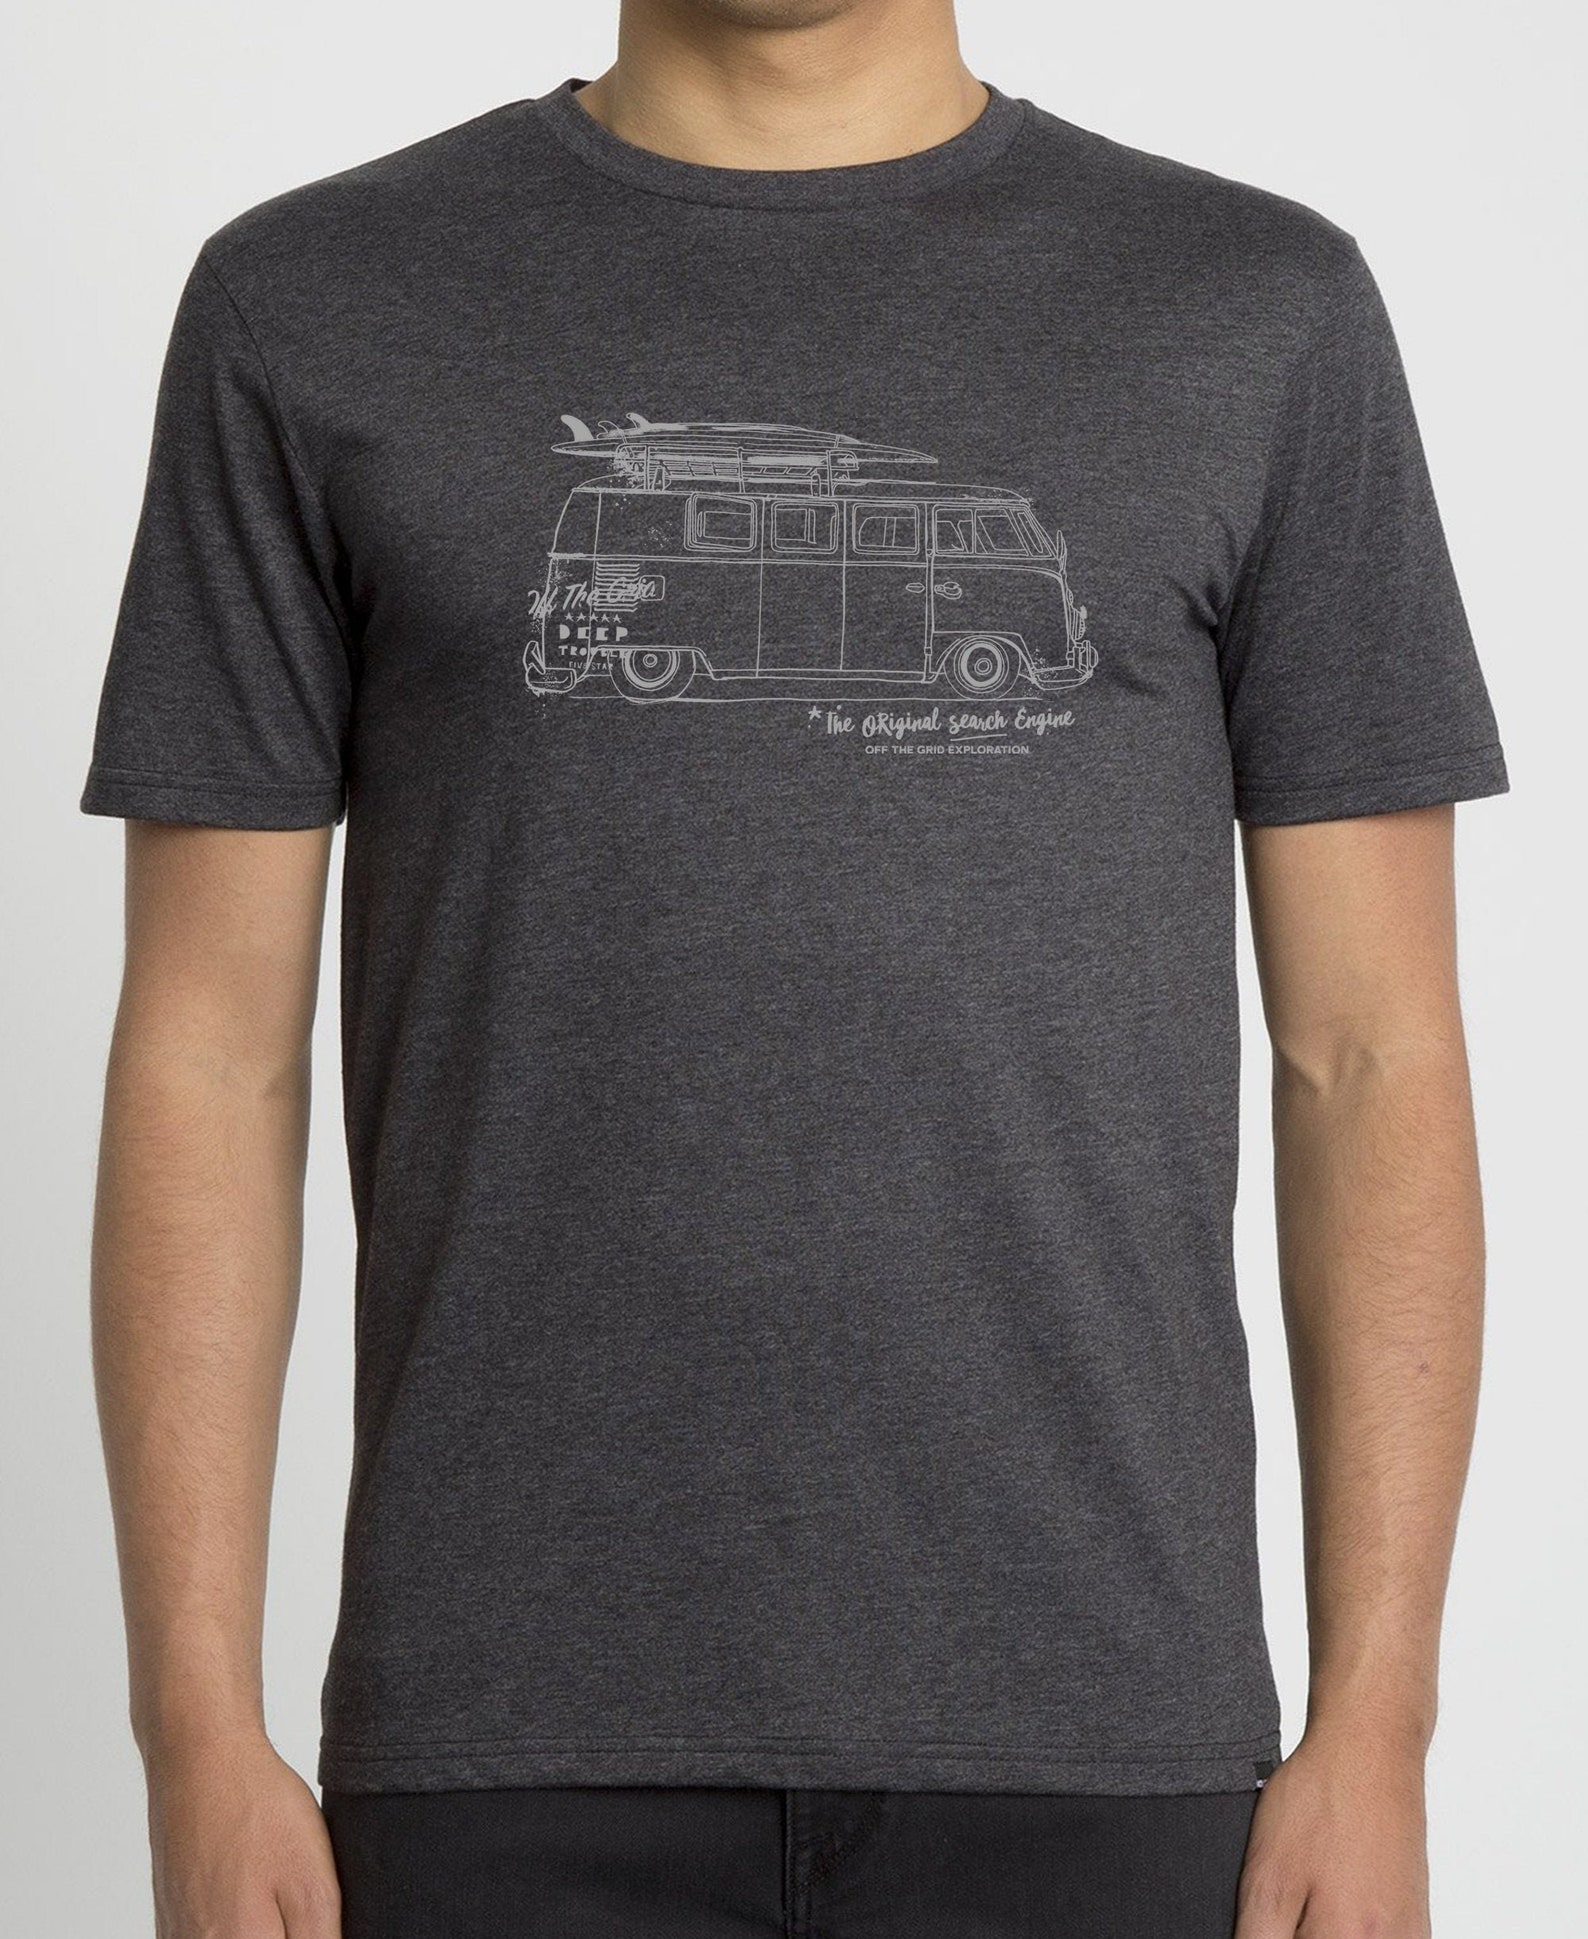 The Original Search Engine T-Shirt Camper Van Tee or Camping | Etsy